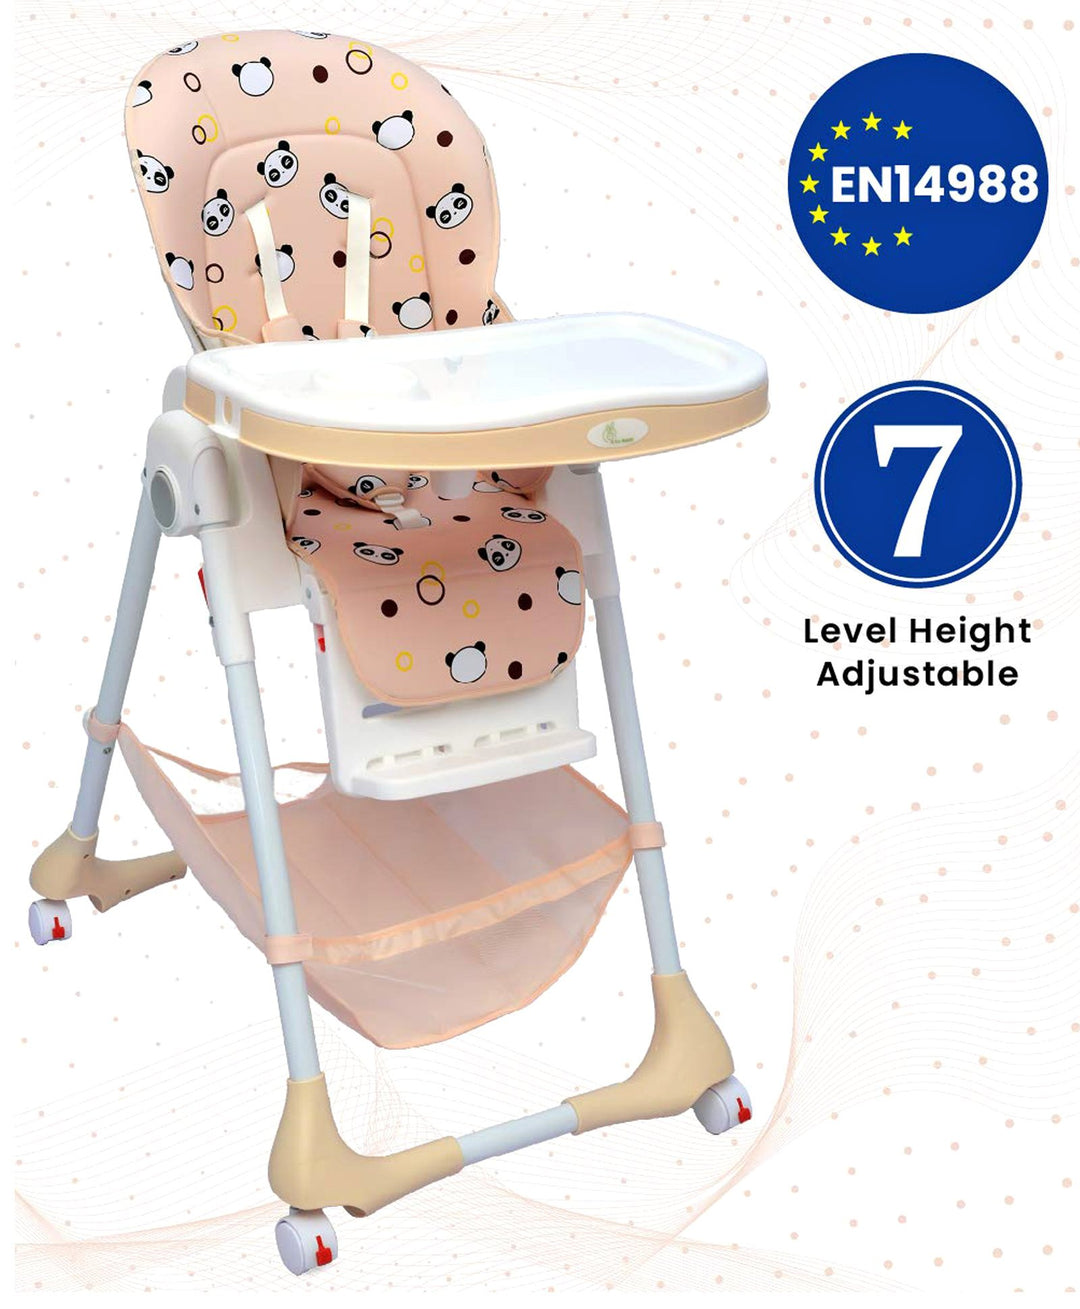 R for Rabbit Marshmallow The Smart High Chair